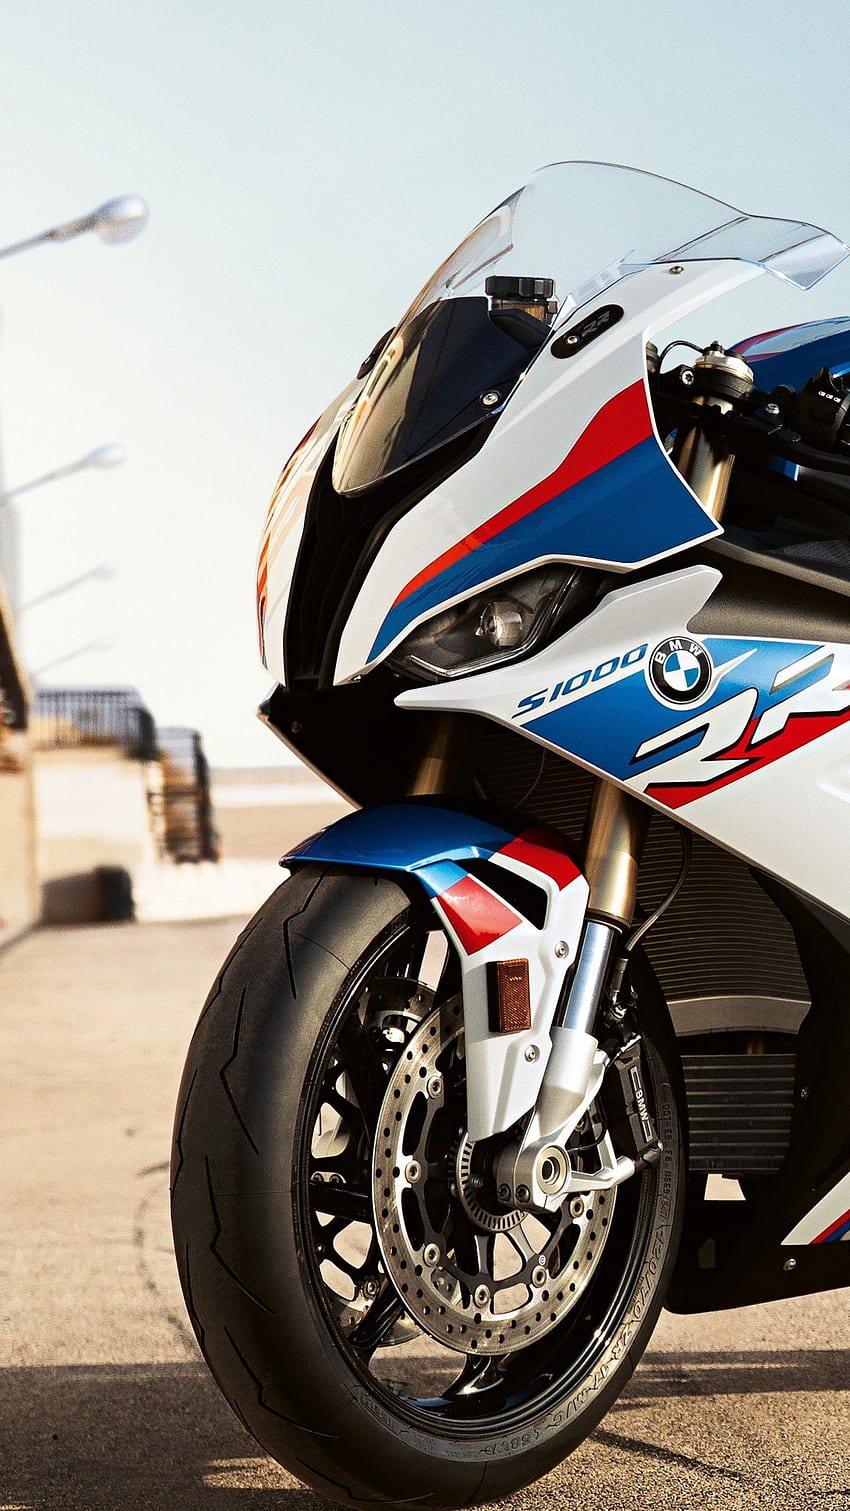 Bmw S1000rr Pictures | Download Free Images on Unsplash